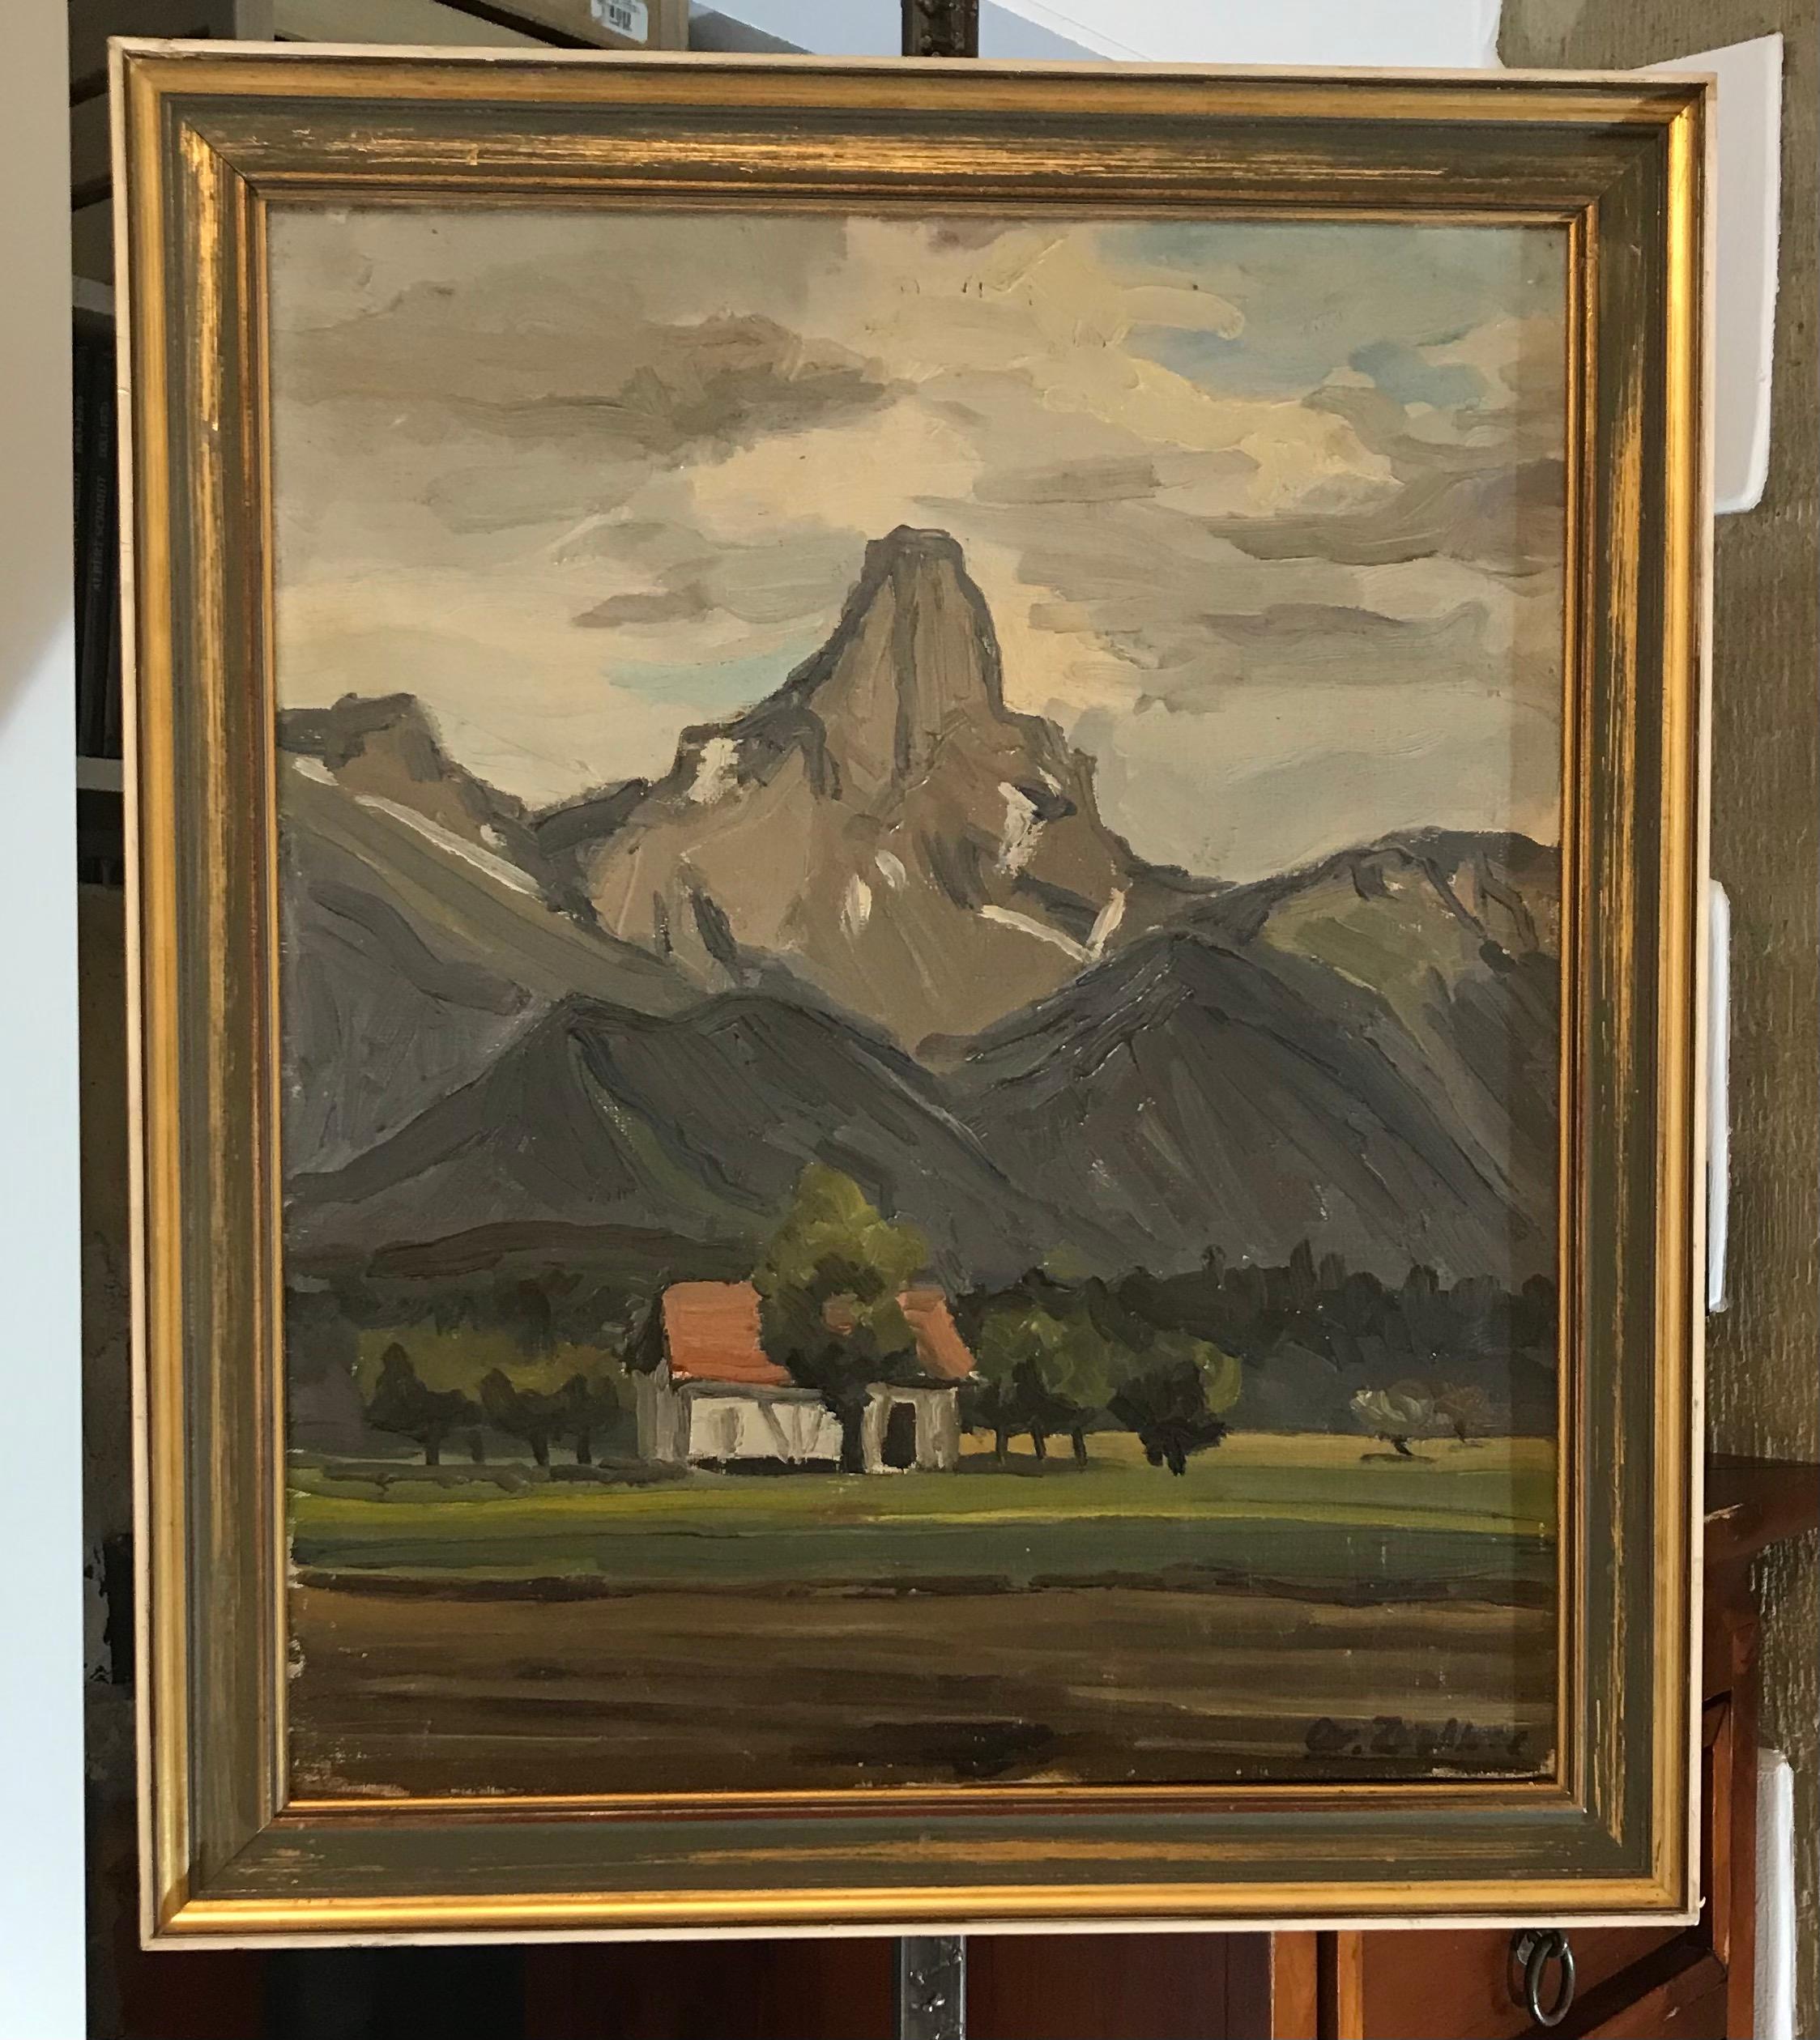 Mountains by Charles de Ziegler - Oil on canvas - Painting by Charles De Ziegler